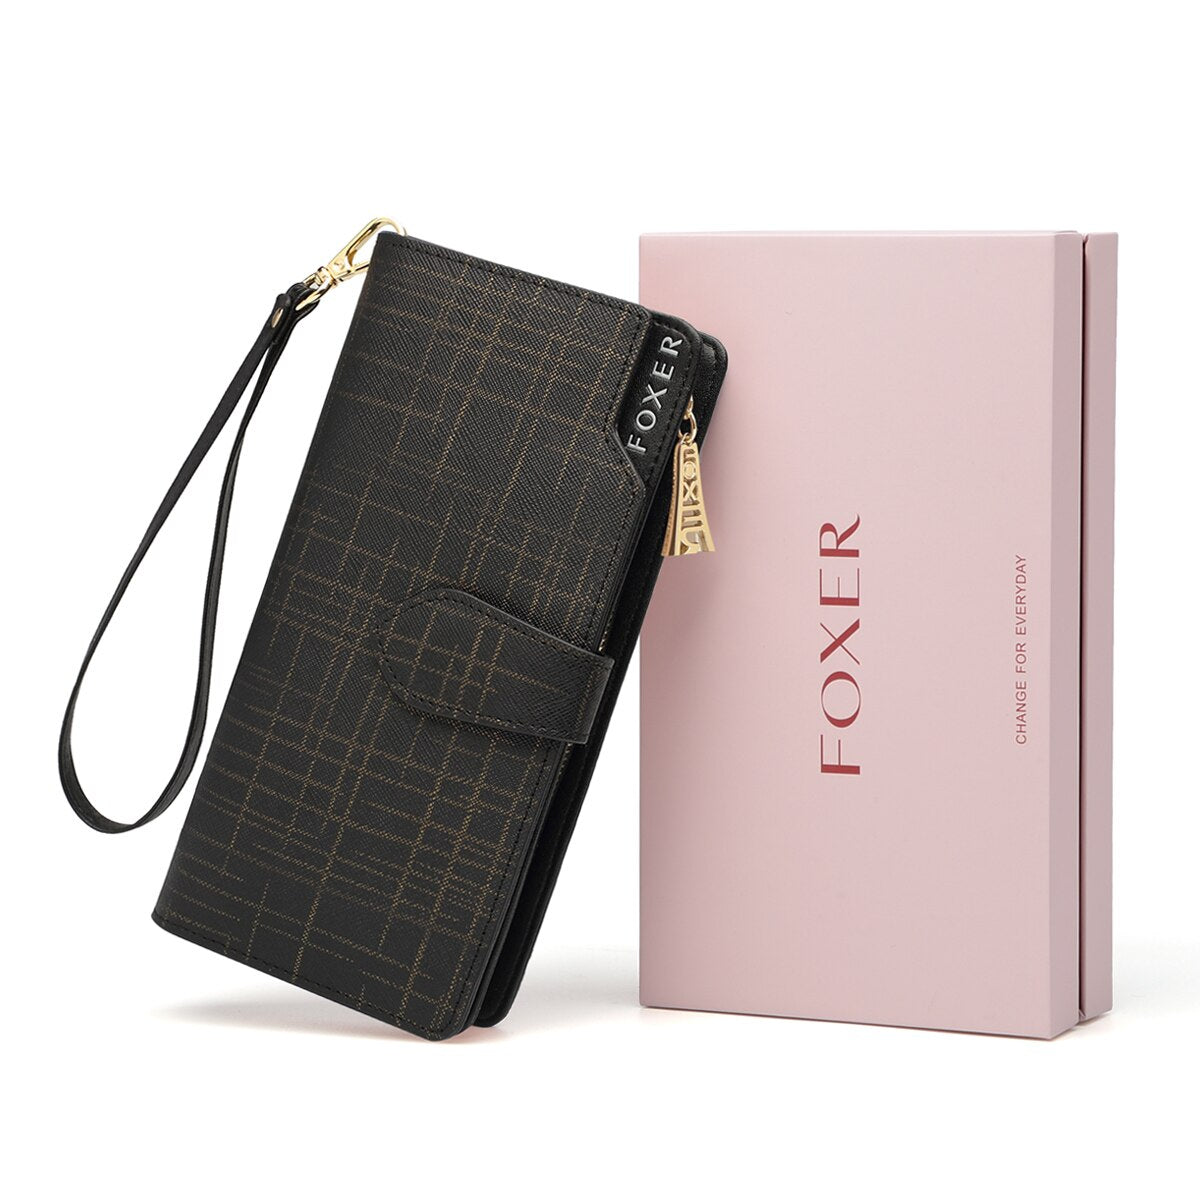 FOXER Valentine Day present Money Bag Large Capacity Ladies Card Holder Women Cow Leather Long Wallet Female Phone Luxury Purse